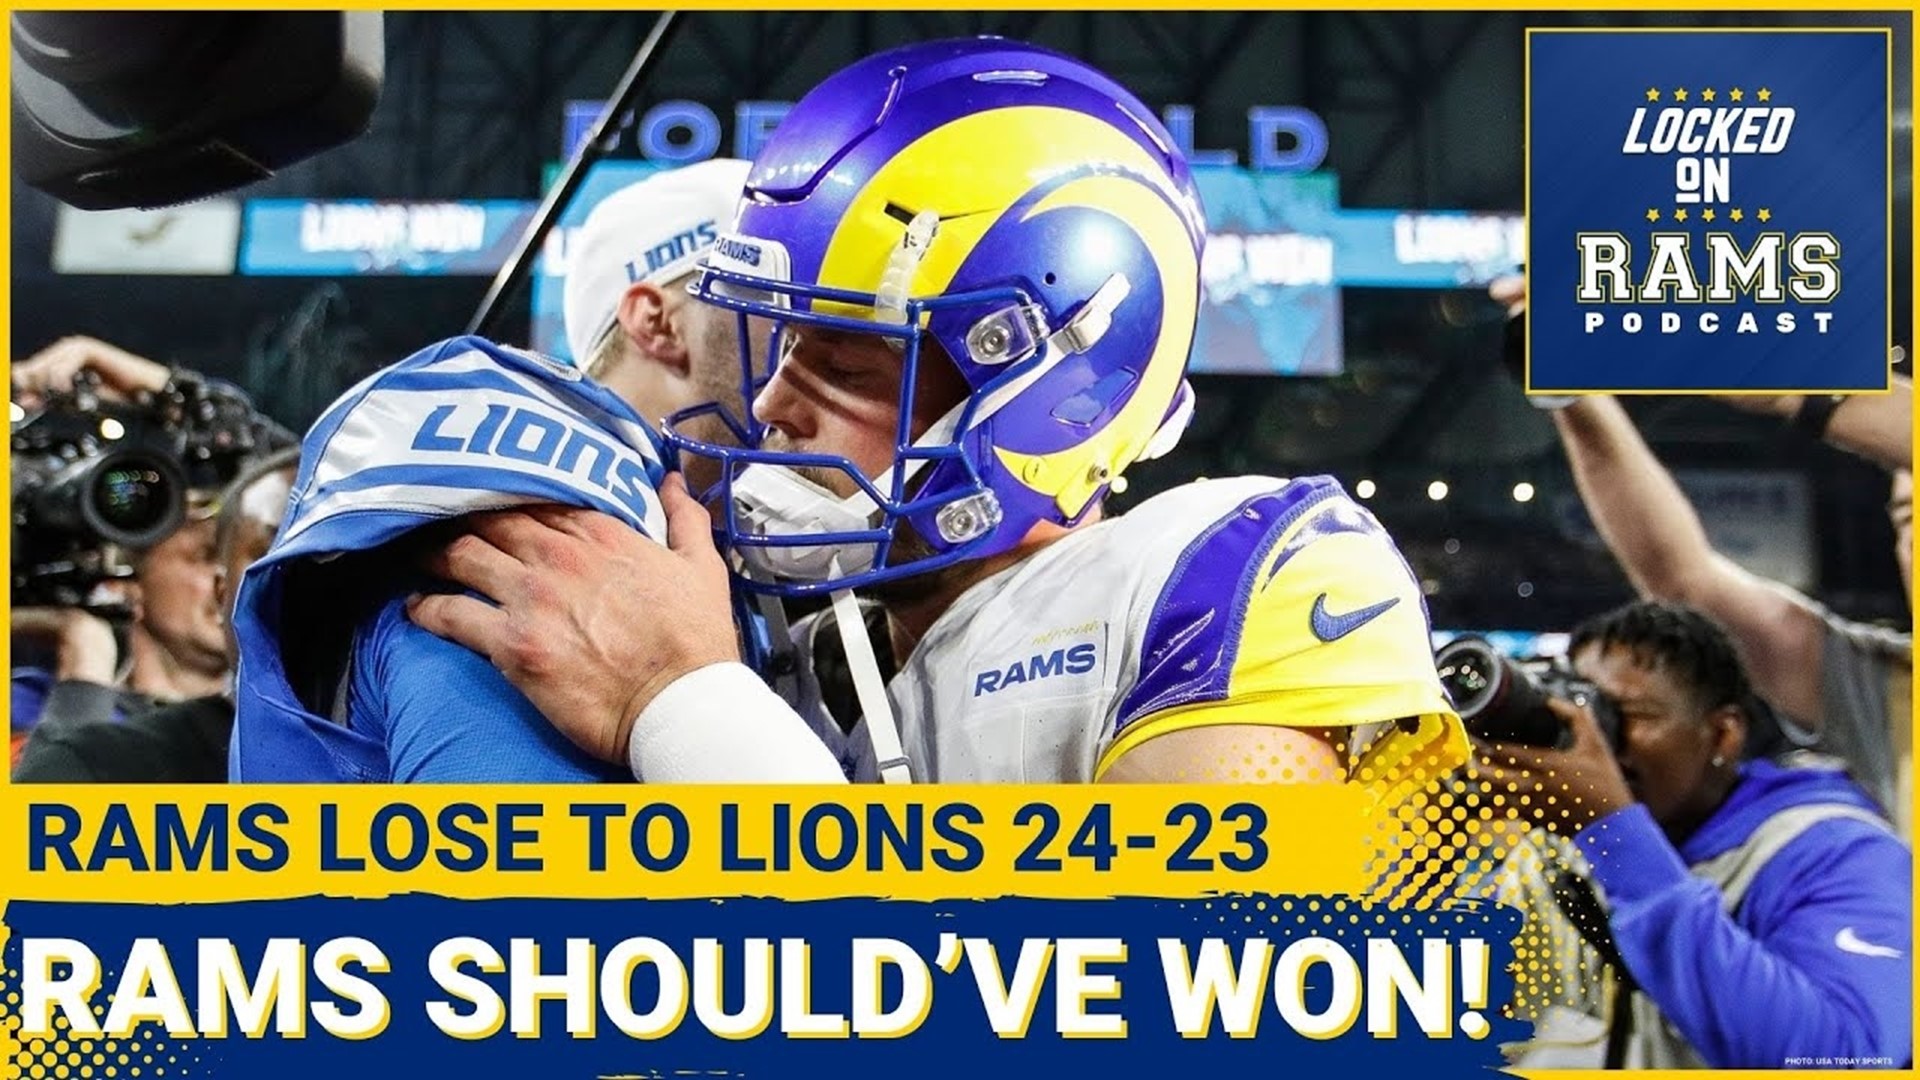 The Los Angeles Rams fought valiantly, but ultimately, their season ended in a 24-23 Wild Card round loss to the Detroit Lions.